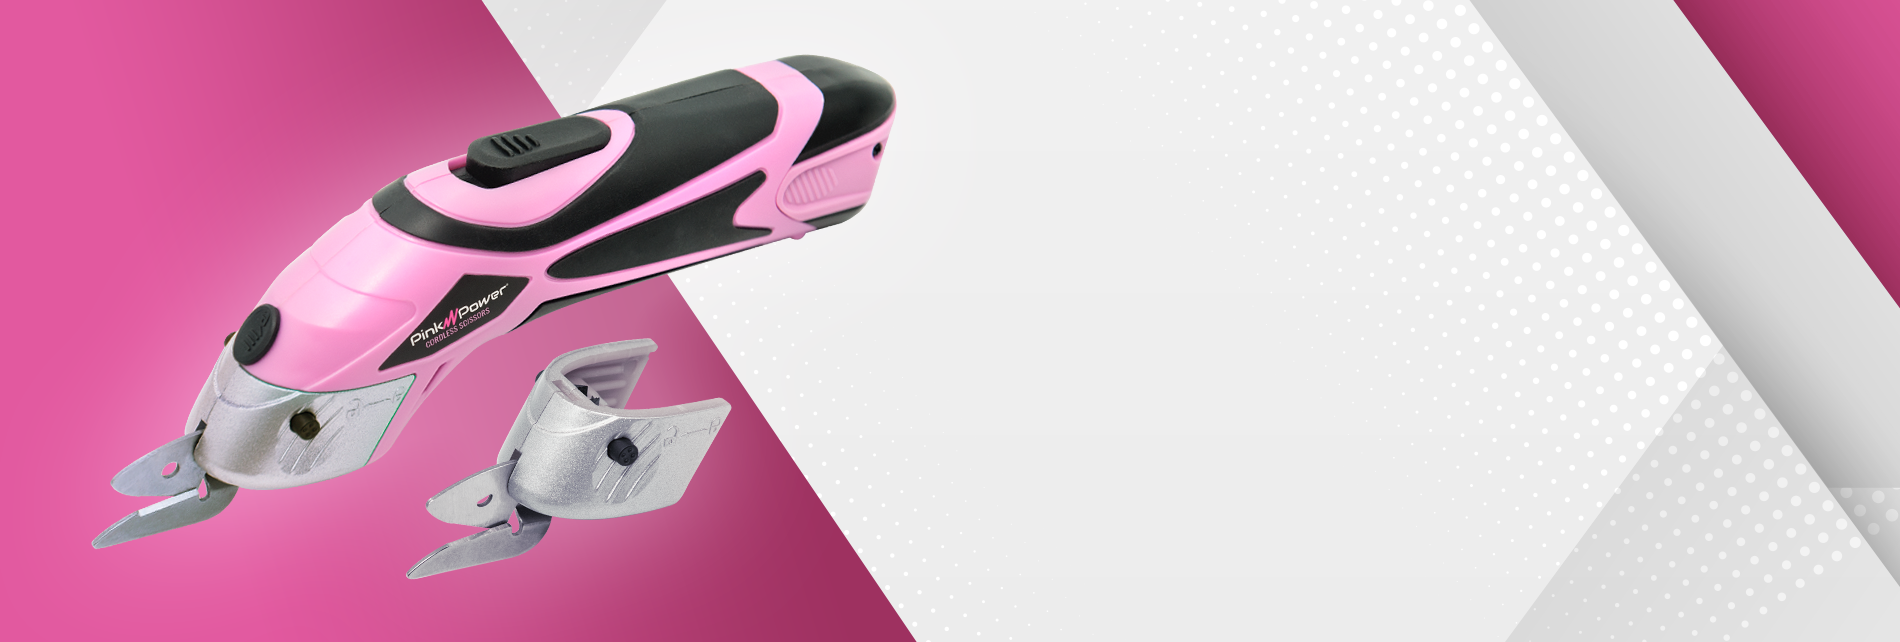 Pink Power HG2043 Electric Scissors - Cardboard and Metal Replacement Blade  Lithium Ion - Cardboard Scissors (PPD Blade) 